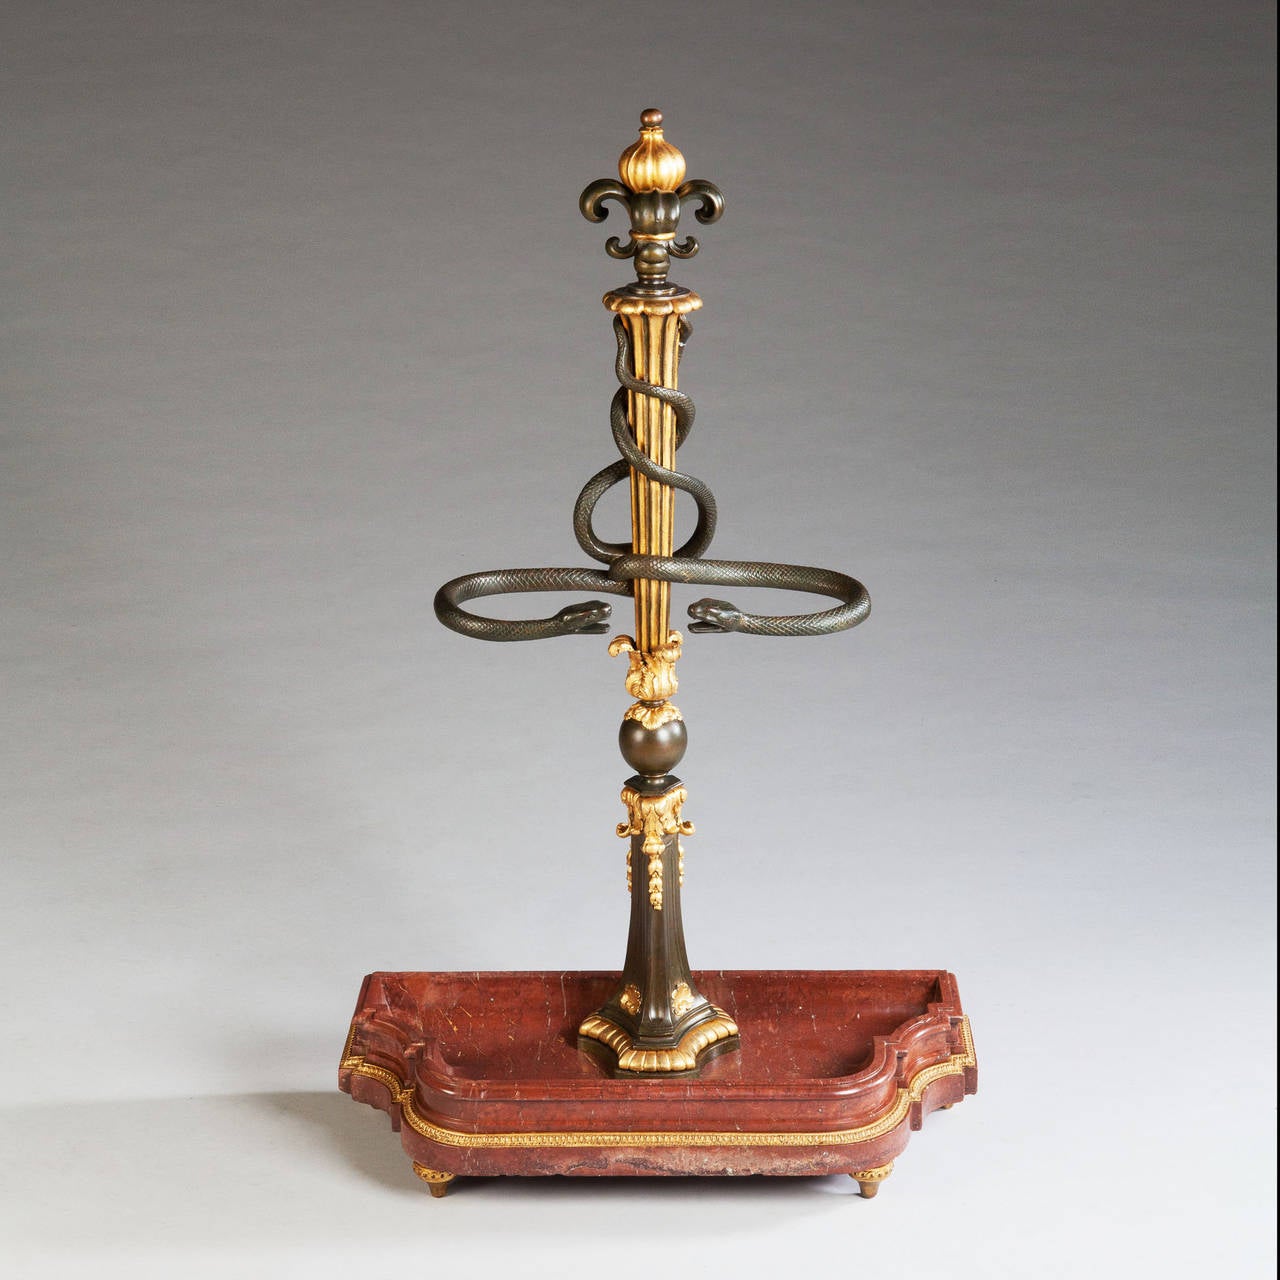 An exceptional parcel-gilt bronze stick stand, the shaped red marble base supporting a fine bronze and parcel-gilt fluted and mounted column with a pair of finely cast entwined snakes as the rests. The whole standing of gilt feet with a running